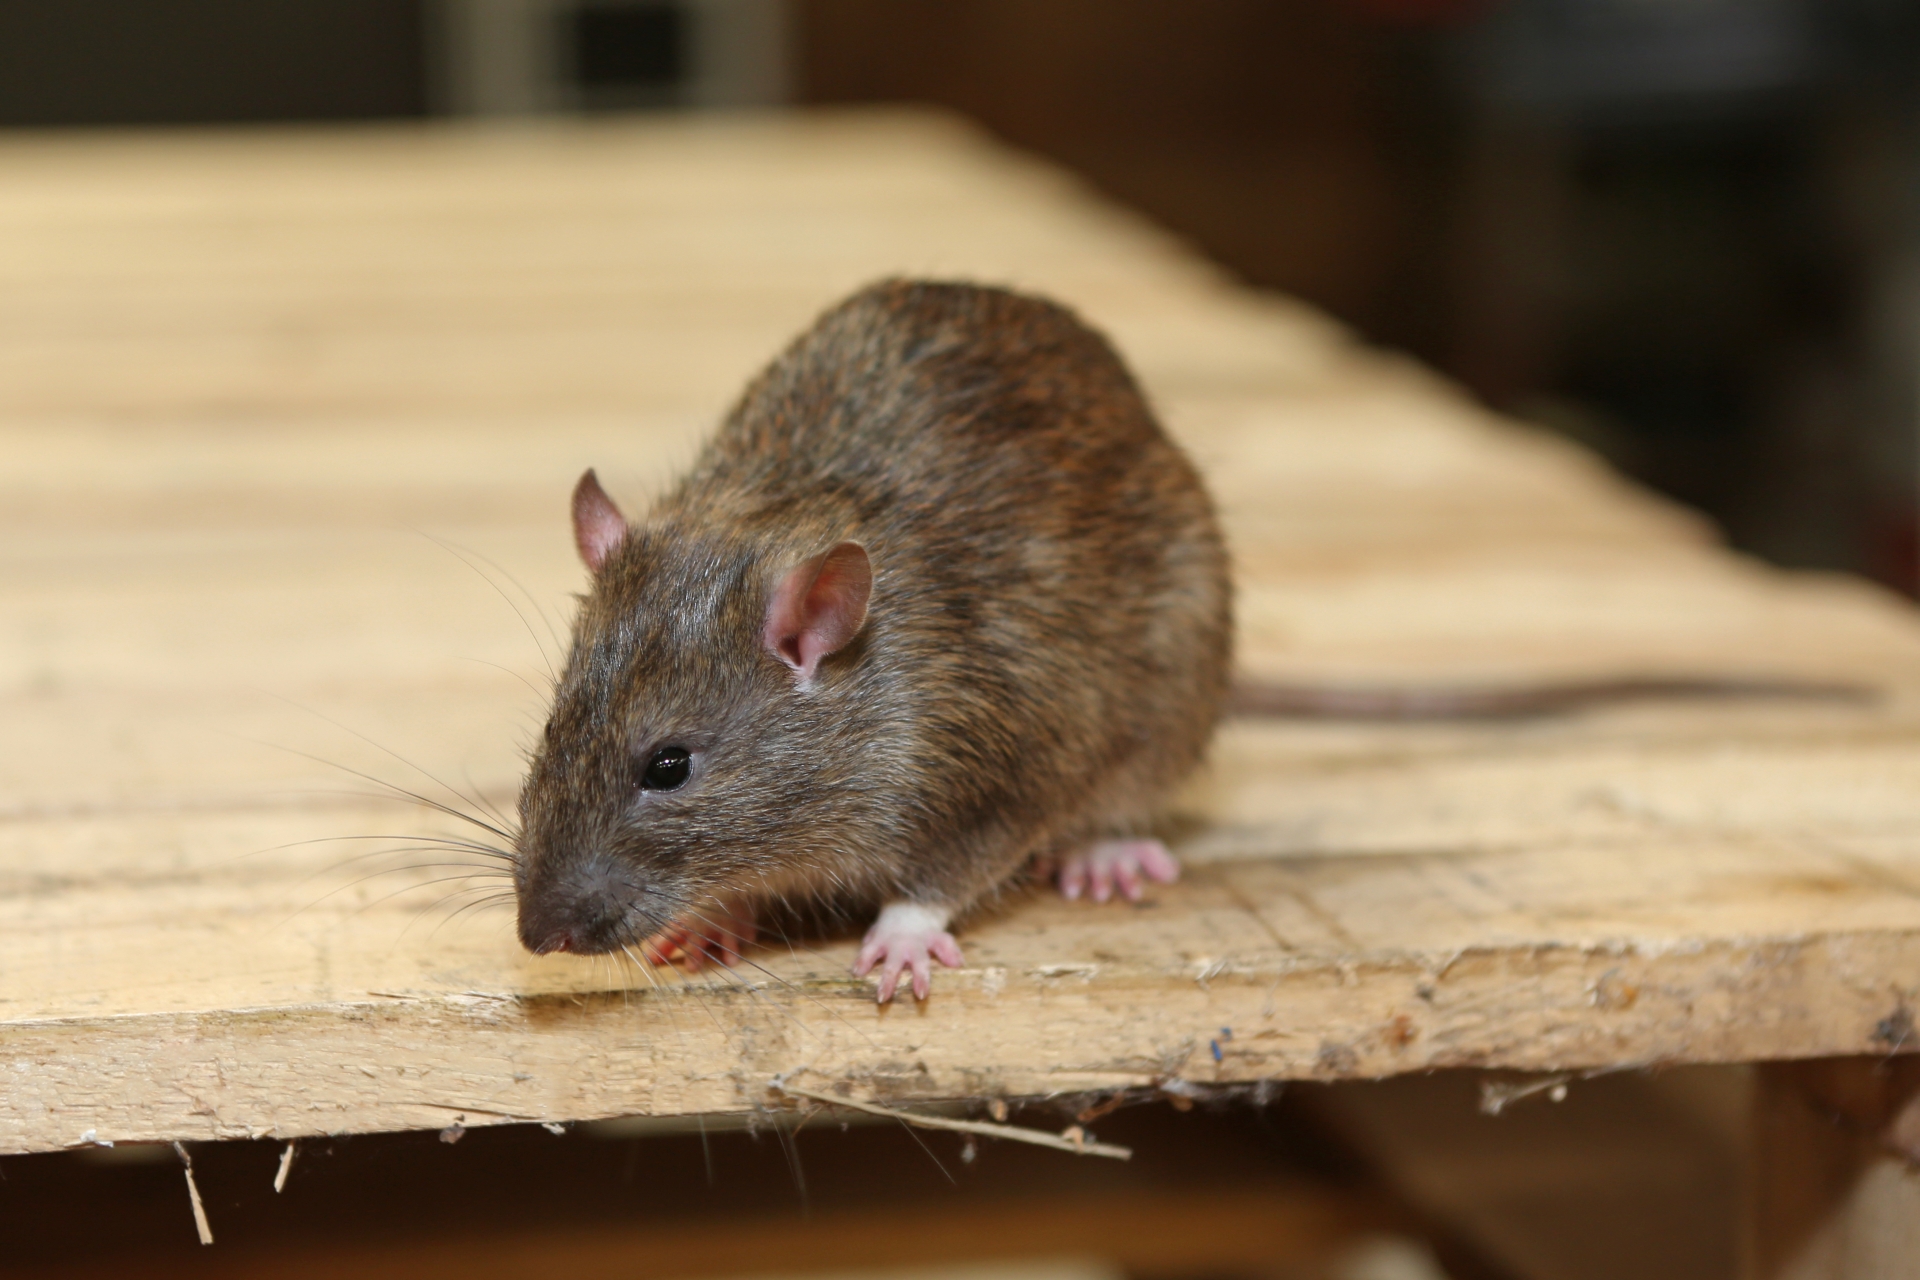 Rat extermination, Pest Control in Ponders End, Enfield Wash, EN3. Call Now 020 8166 9746